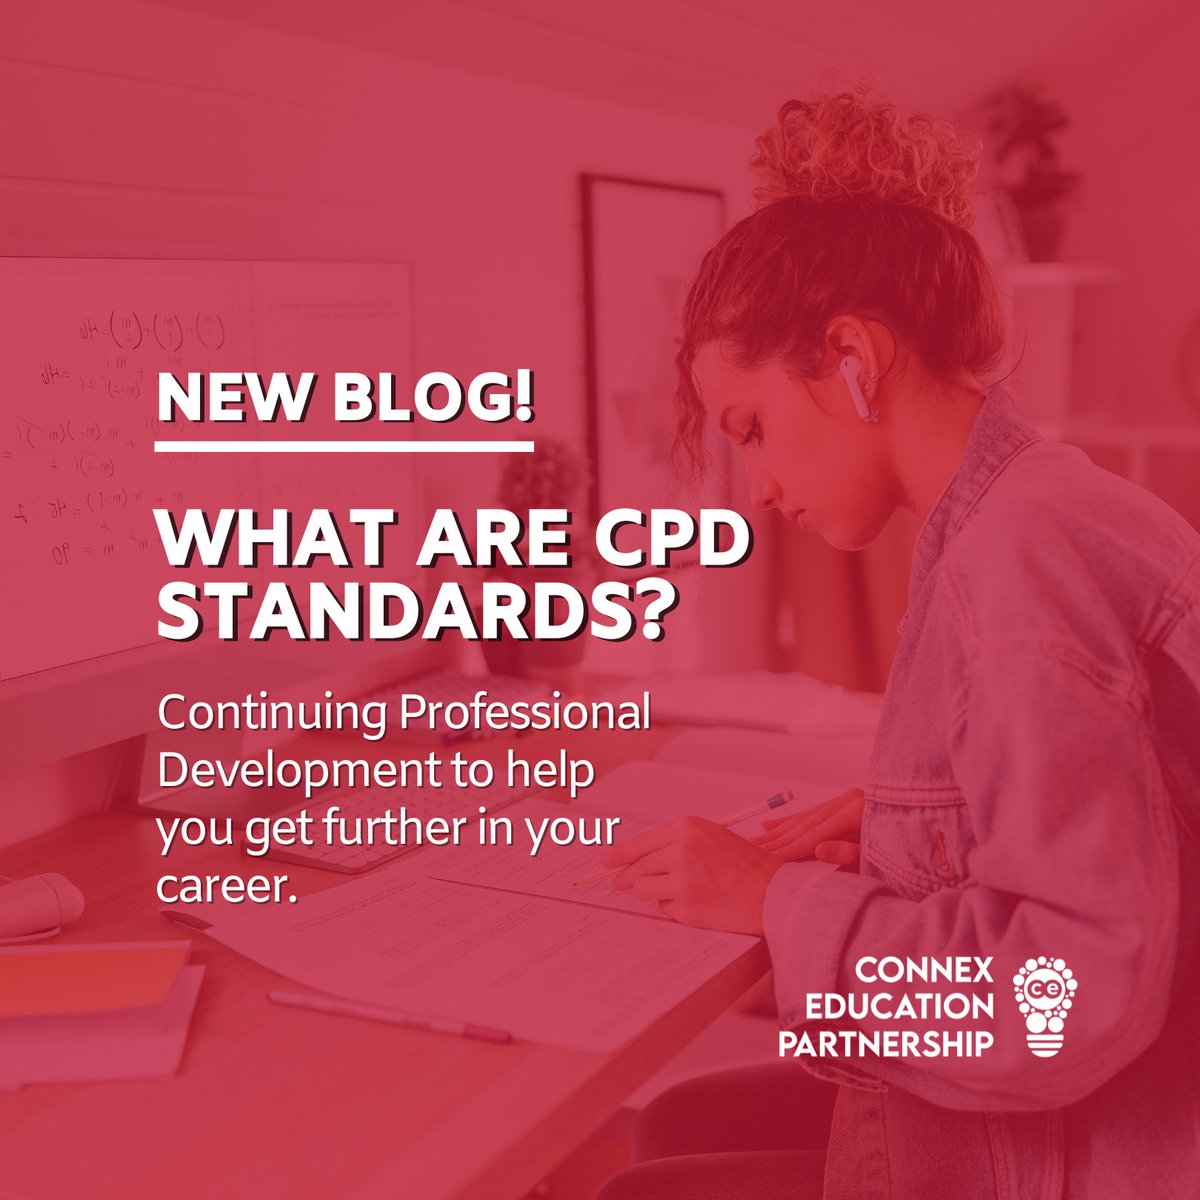 🚨 New Blog Post 🚨

What are CPD Standards? 📚🍎

Click here to read 👉 rb.gy/02ri3

#education #cpdstandards #professionaldevelopment #getahead #training